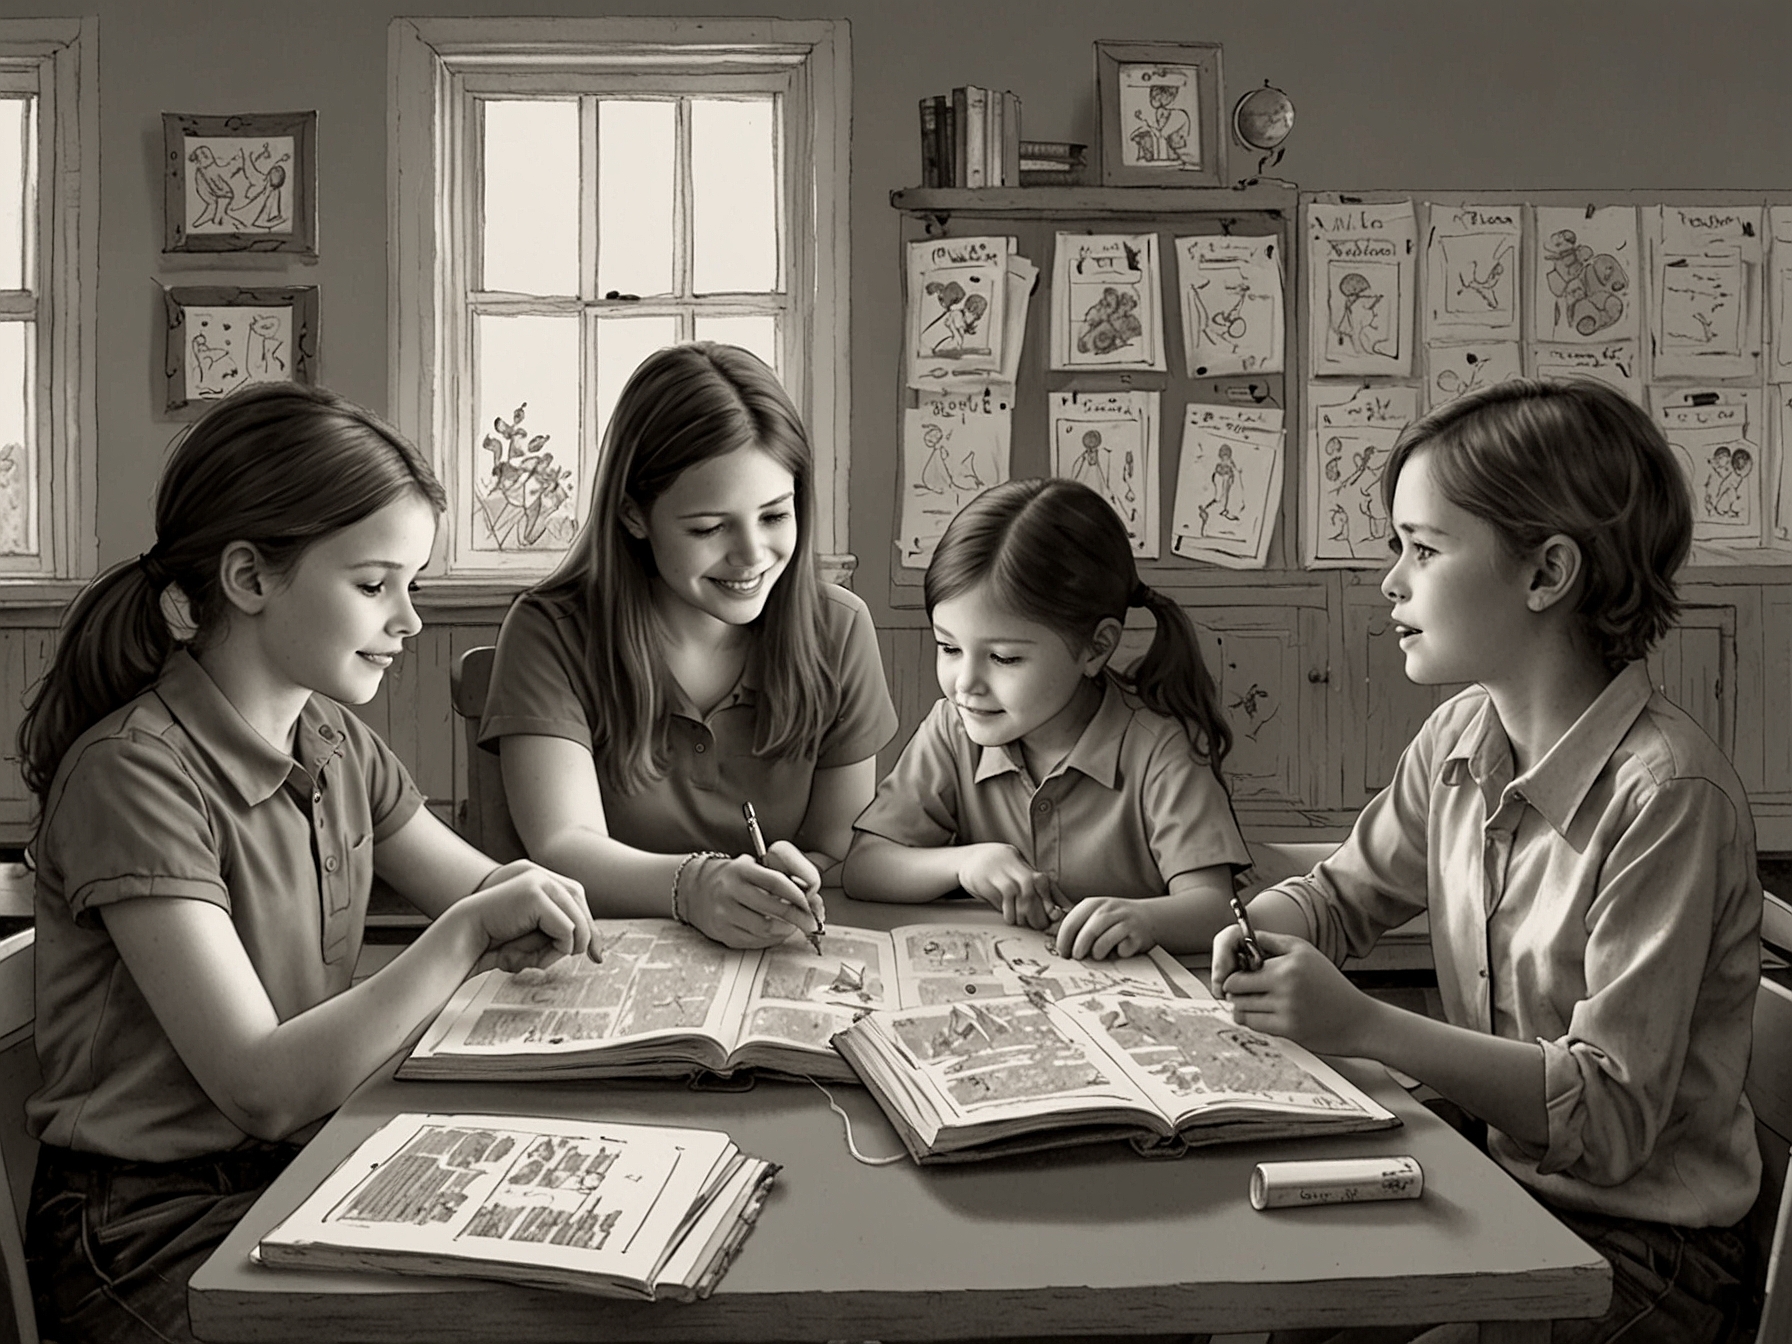 A classroom scene with children engaging in various activities like reading, solving puzzles, and participating in group discussions, illustrating the holistic approach to education.